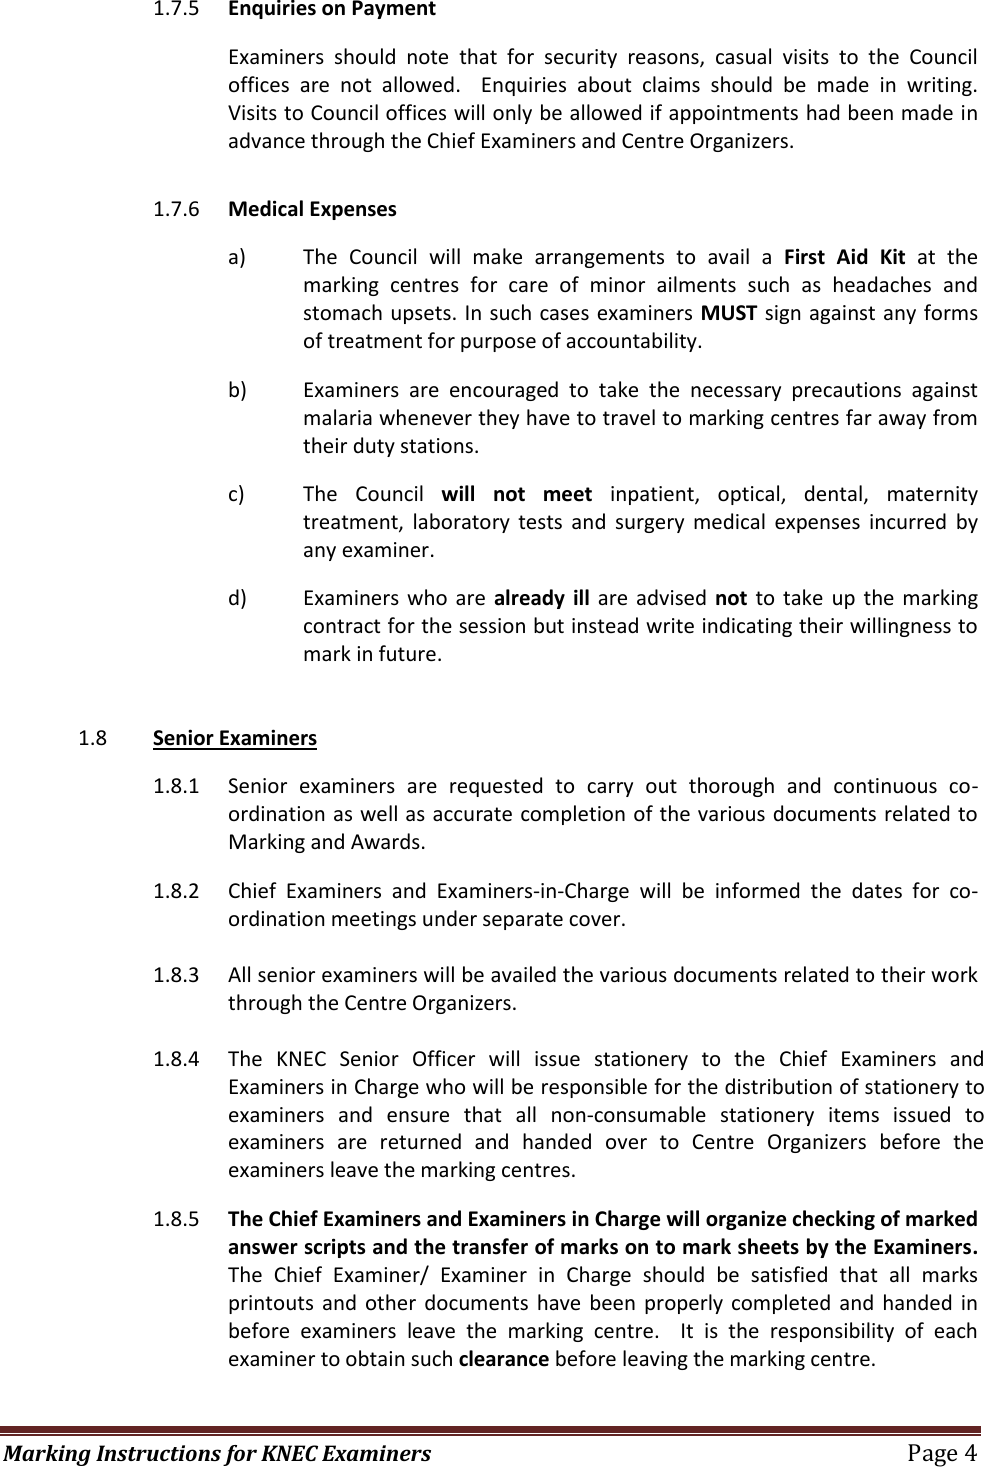 Page 4 of 7 - 02015 MARKING INSTRUCTIONS